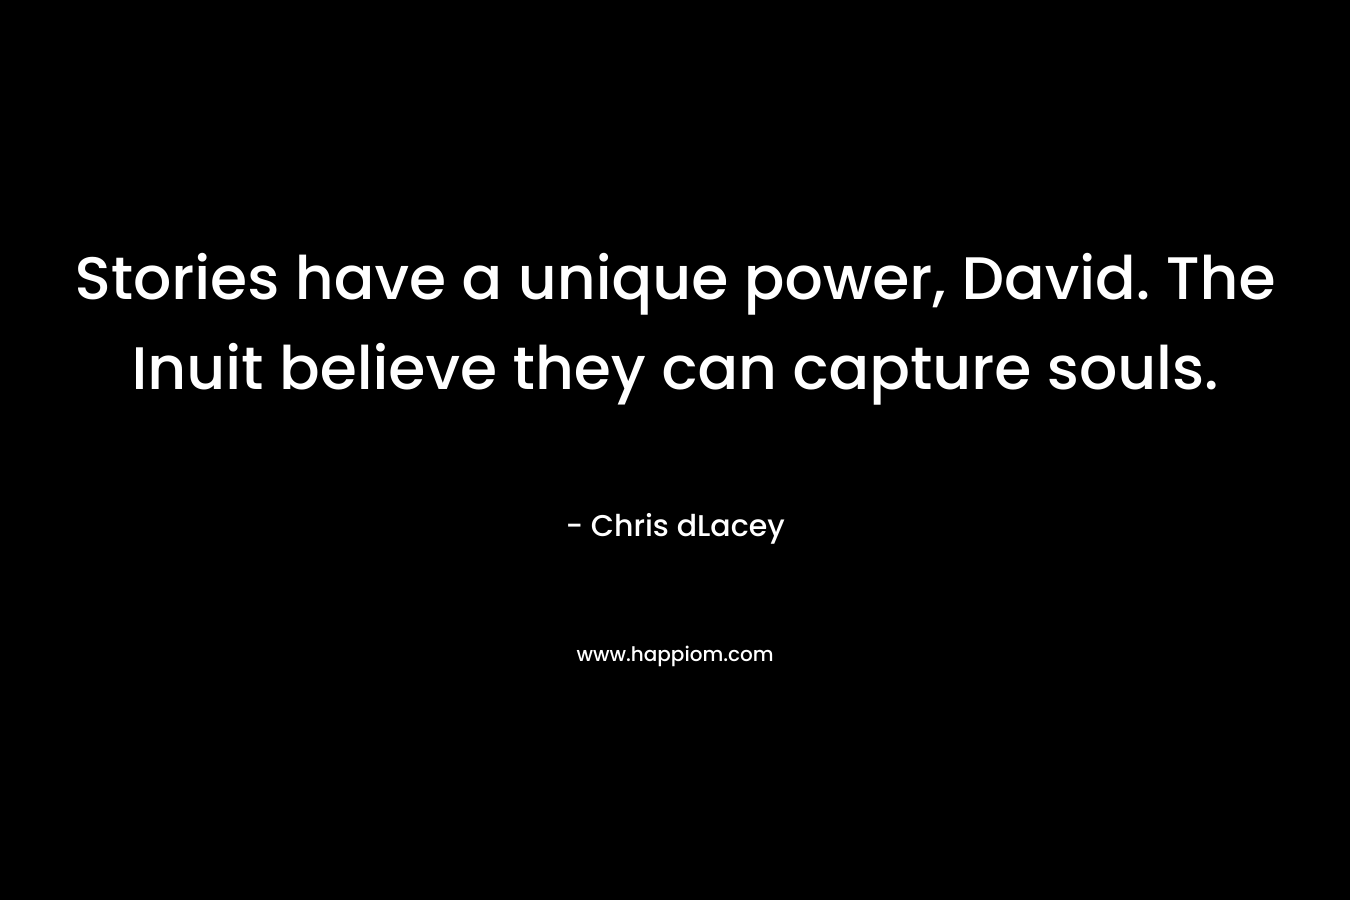 Stories have a unique power, David. The Inuit believe they can capture souls. – Chris dLacey